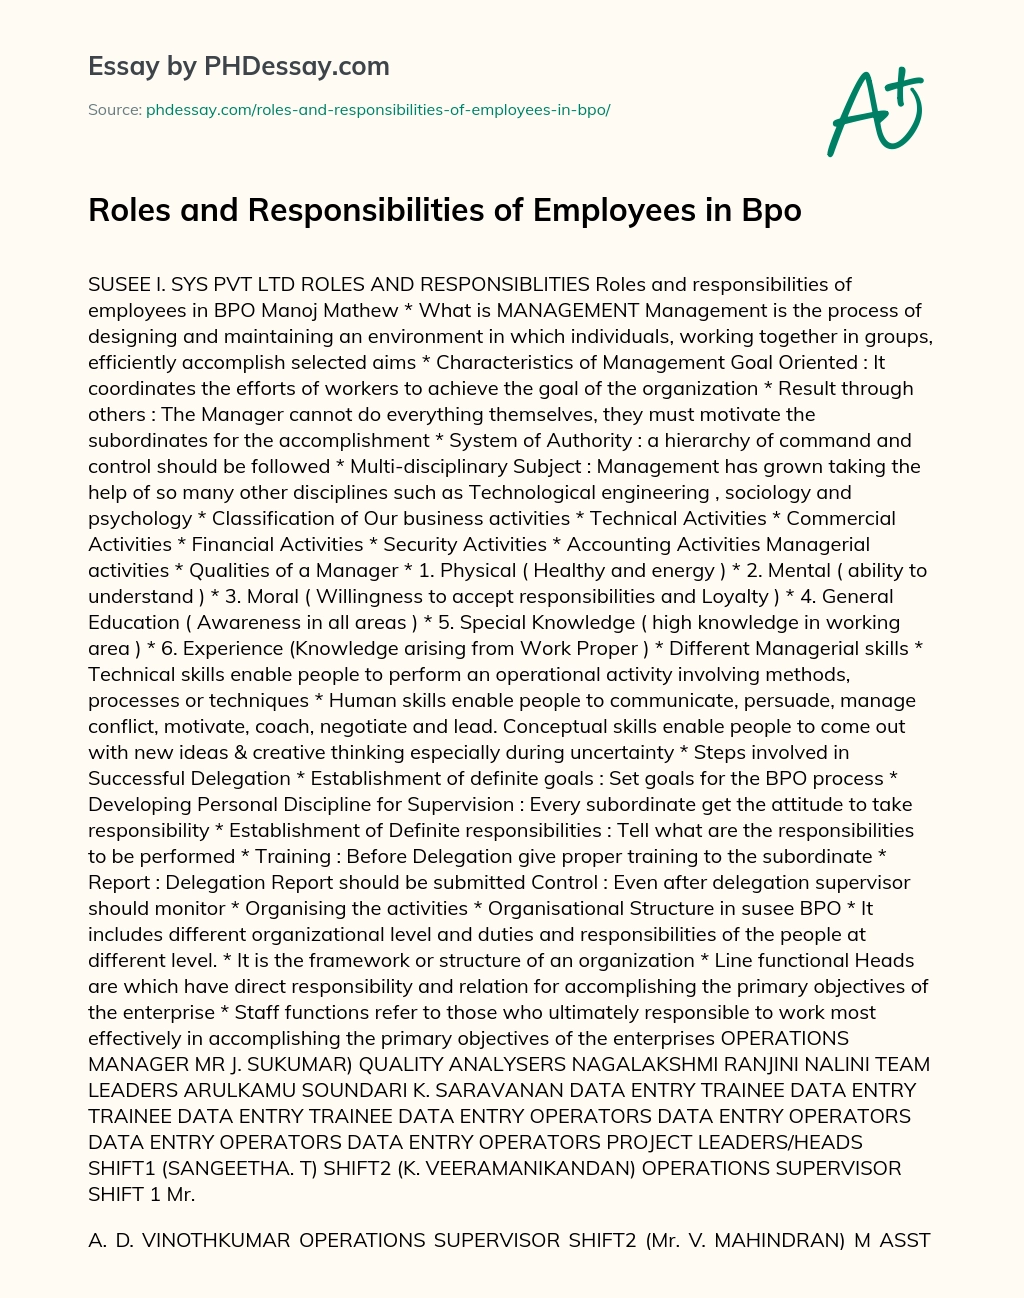 Roles and Responsibilities of Employees in Bpo essay